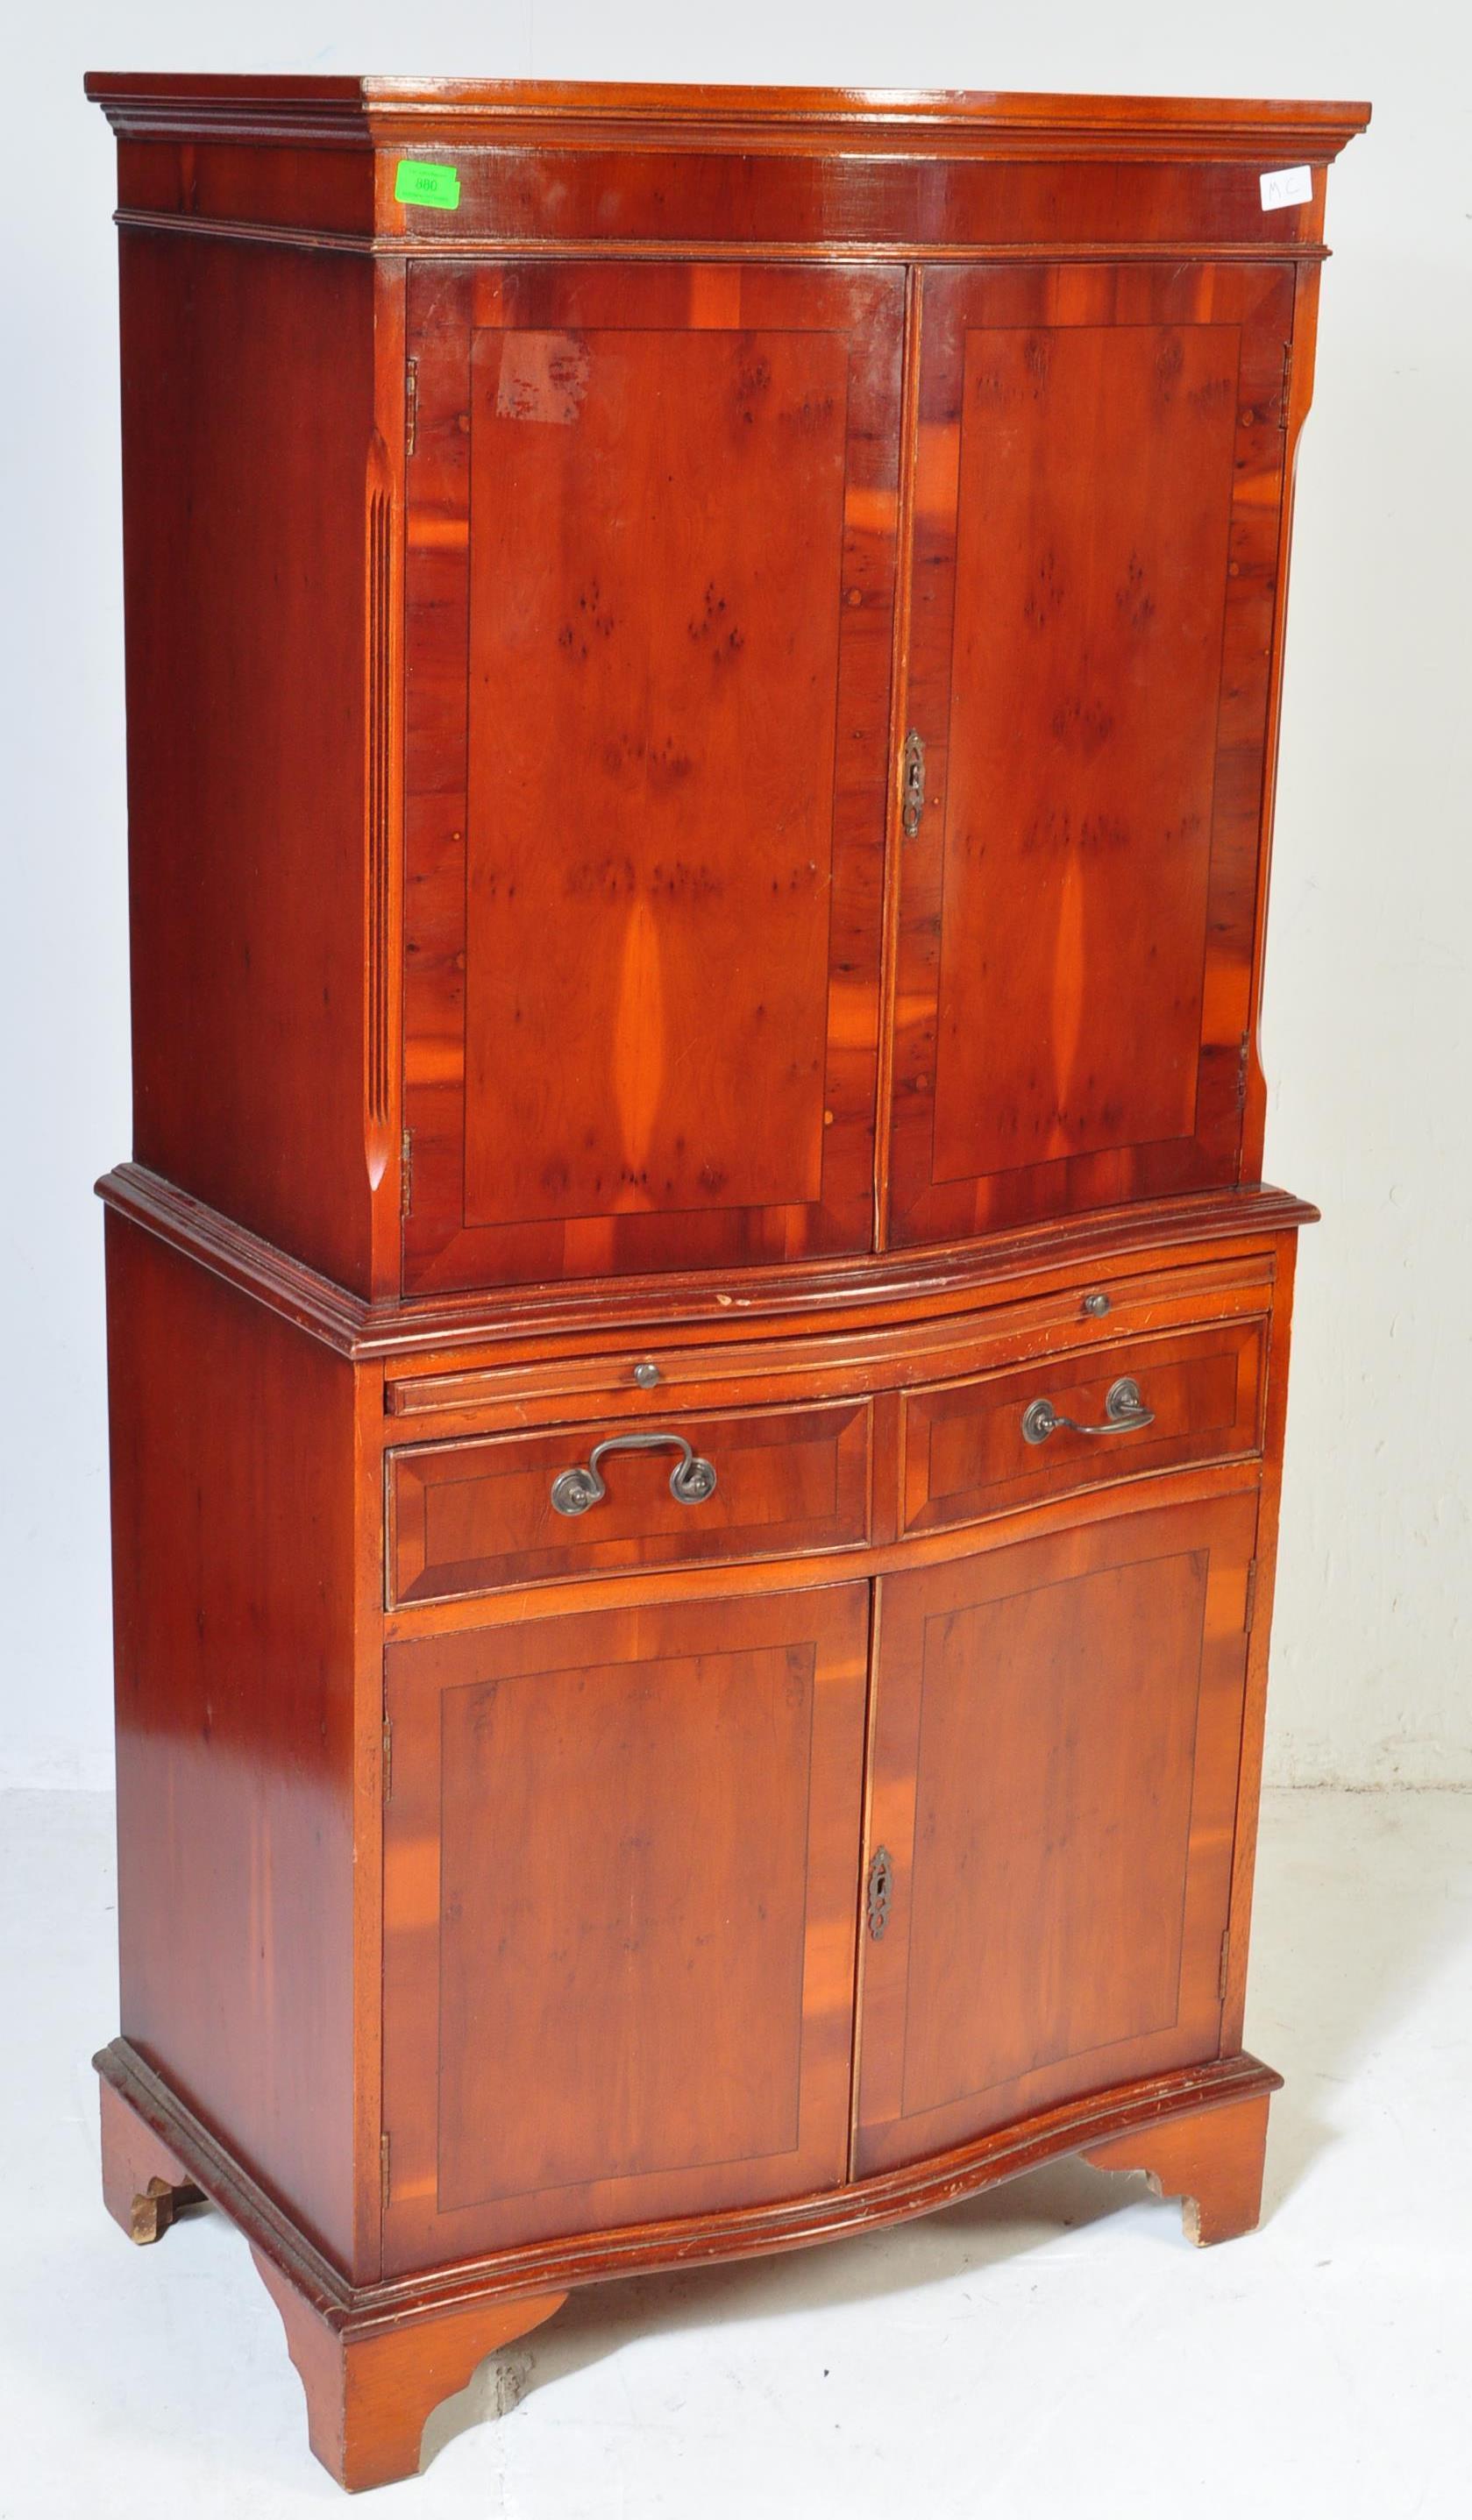 20TH CENTURY YEW AND MAHOGANY VENEER COCKTAIL CABINET - Image 2 of 5